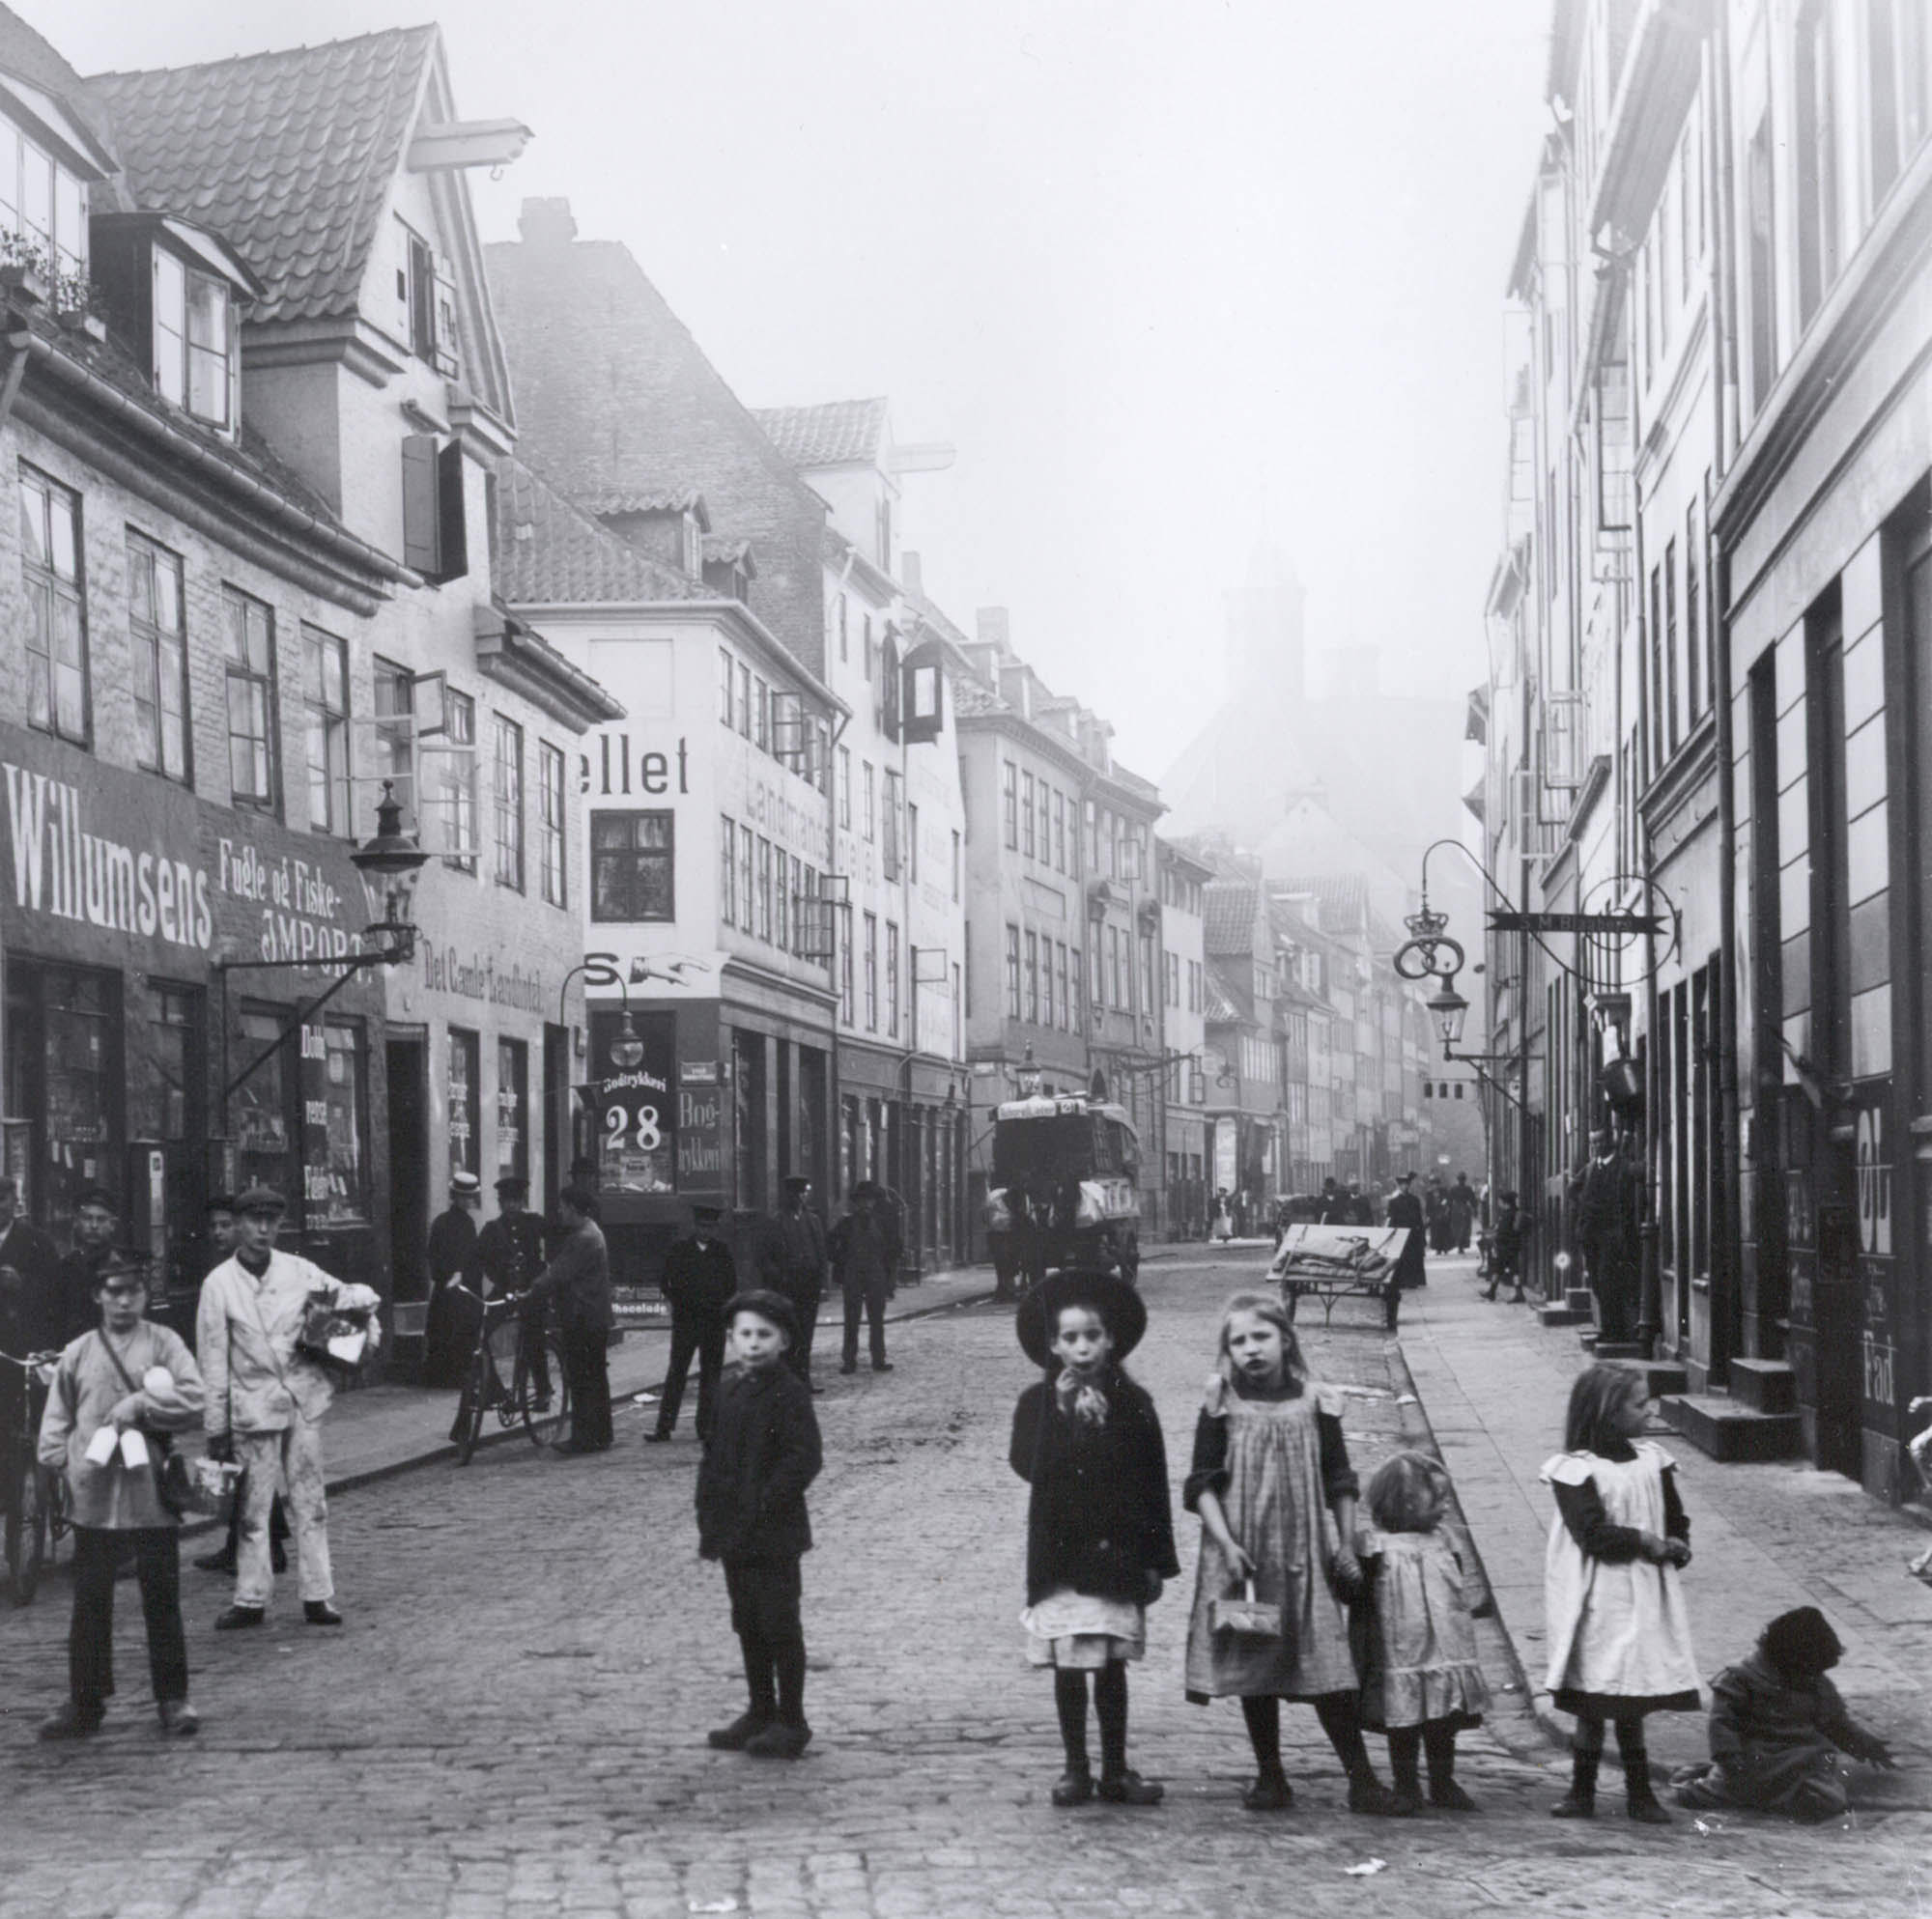 A street in Copenhagen, Denmark in 1900. It's interesting that the entire street posed for the picture, even from considerable distance in the background.